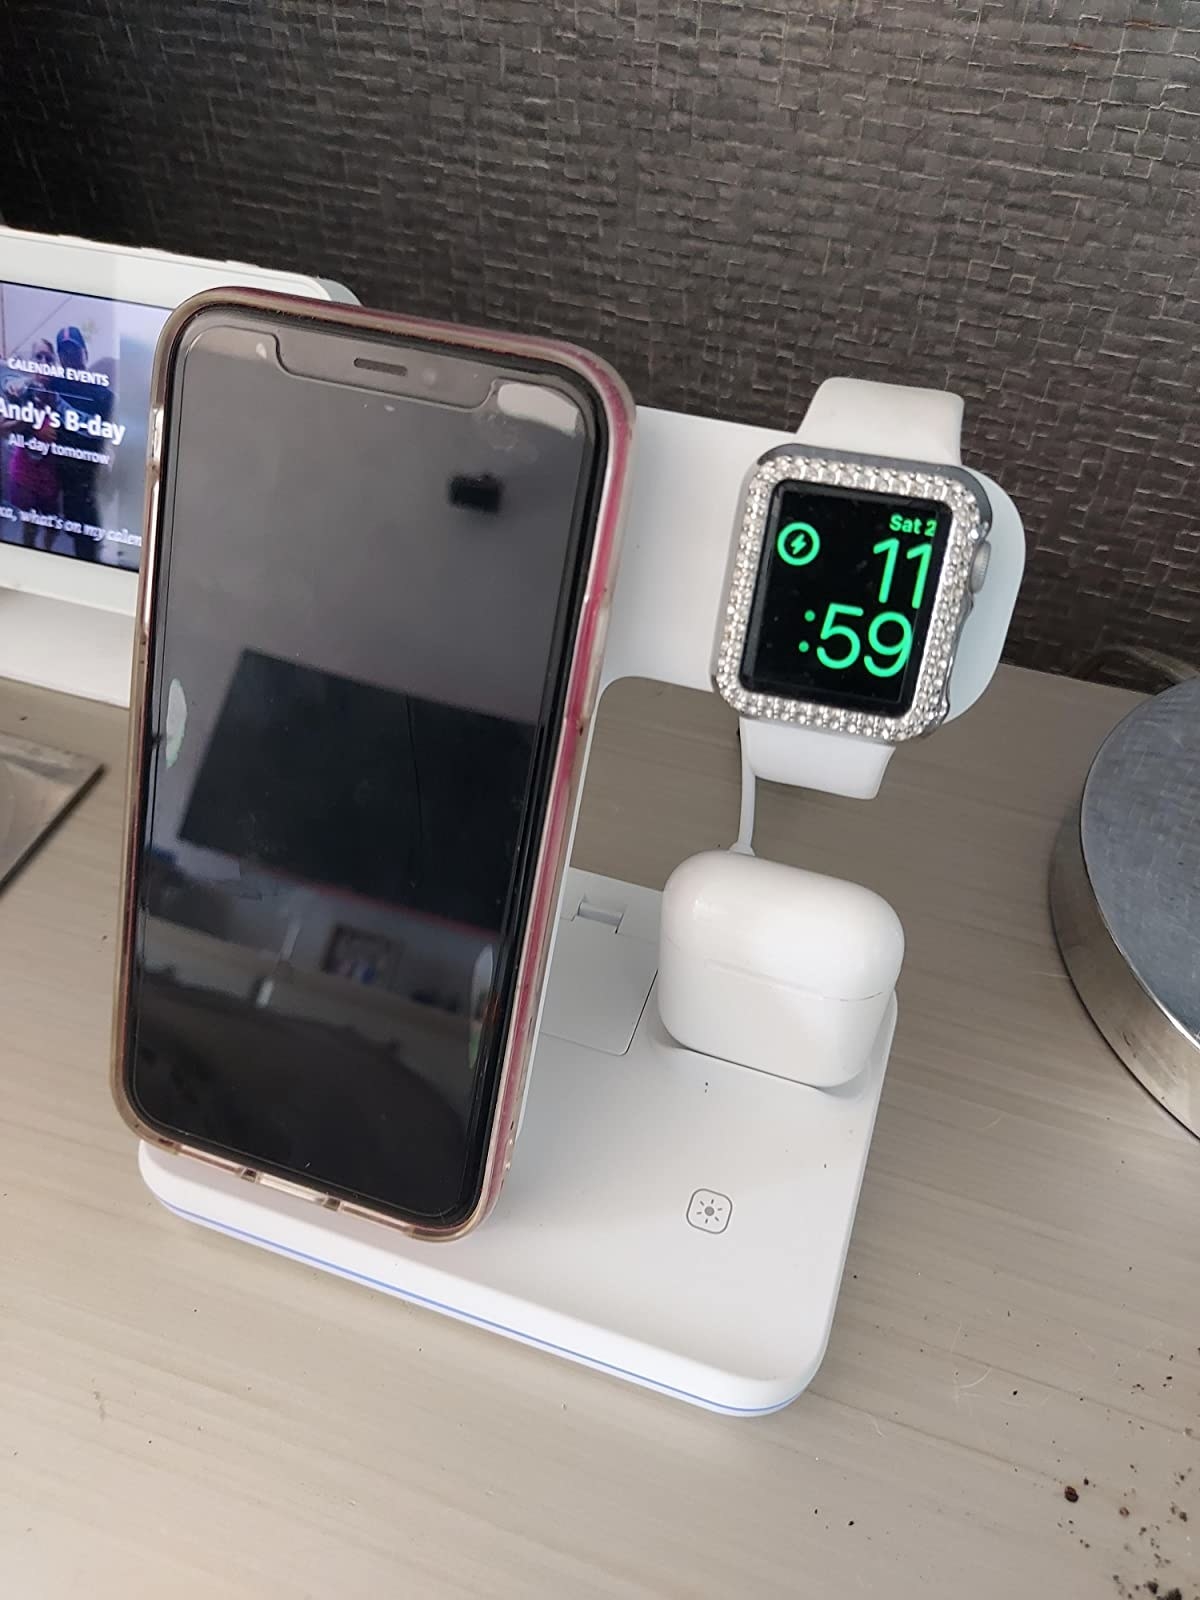 Reviewer photo of their iPhone, Apple Watch, and AirPods charging on the white wireless charger